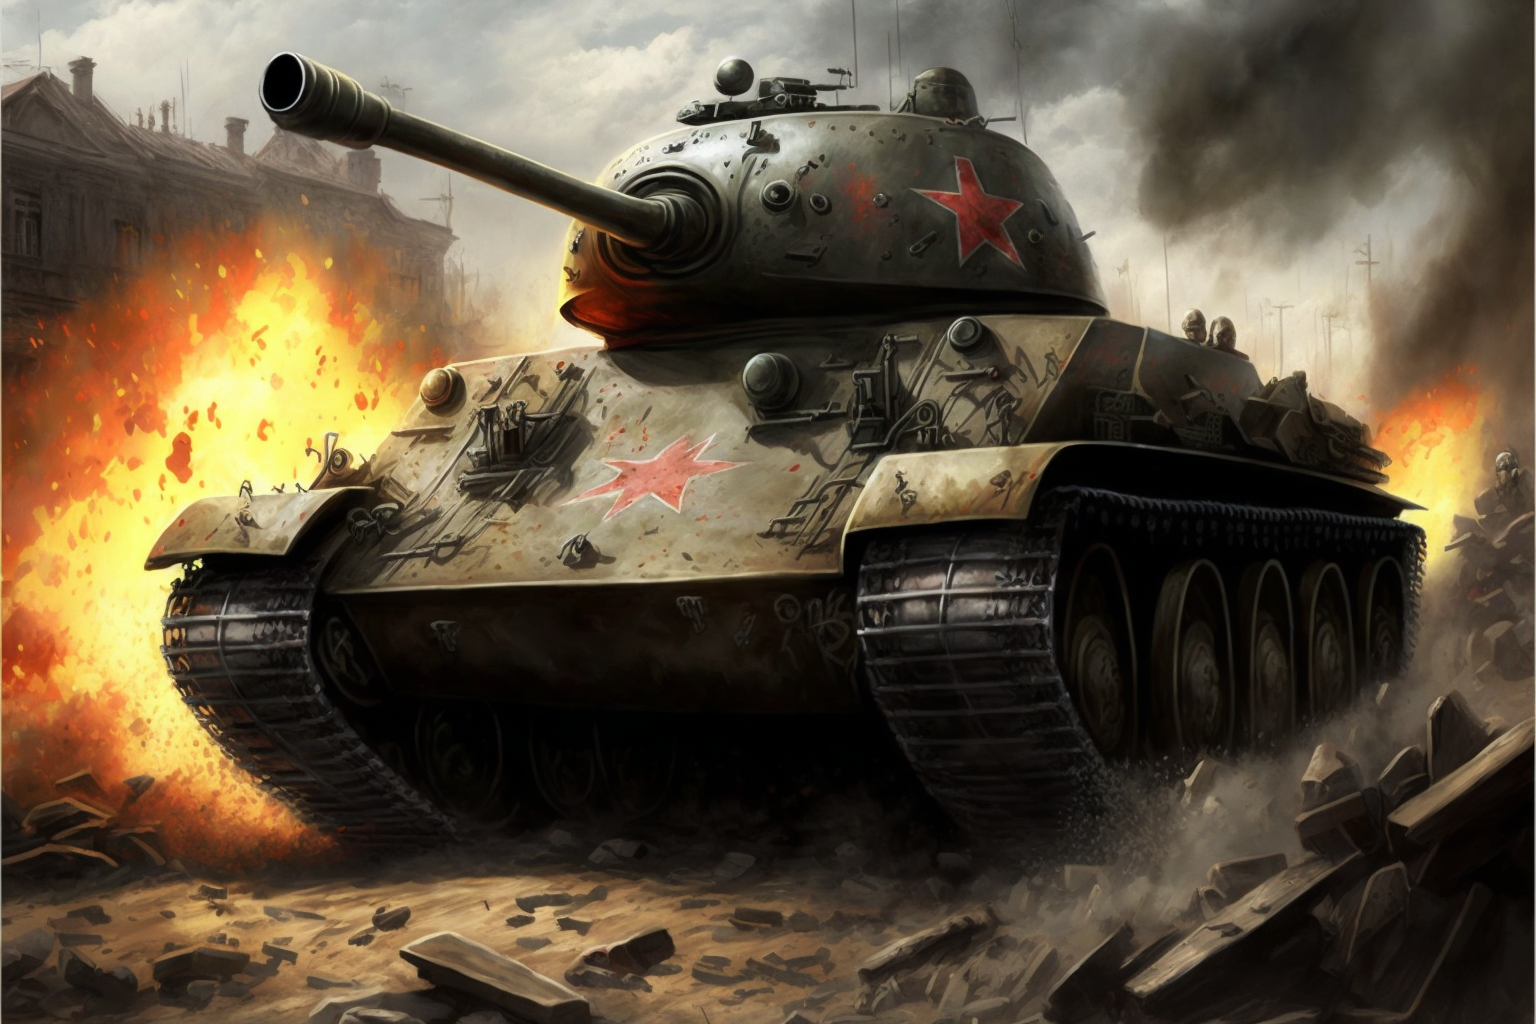 Top 5 Most Iconic Tanks of World War 2: History, Design, and Capabilities